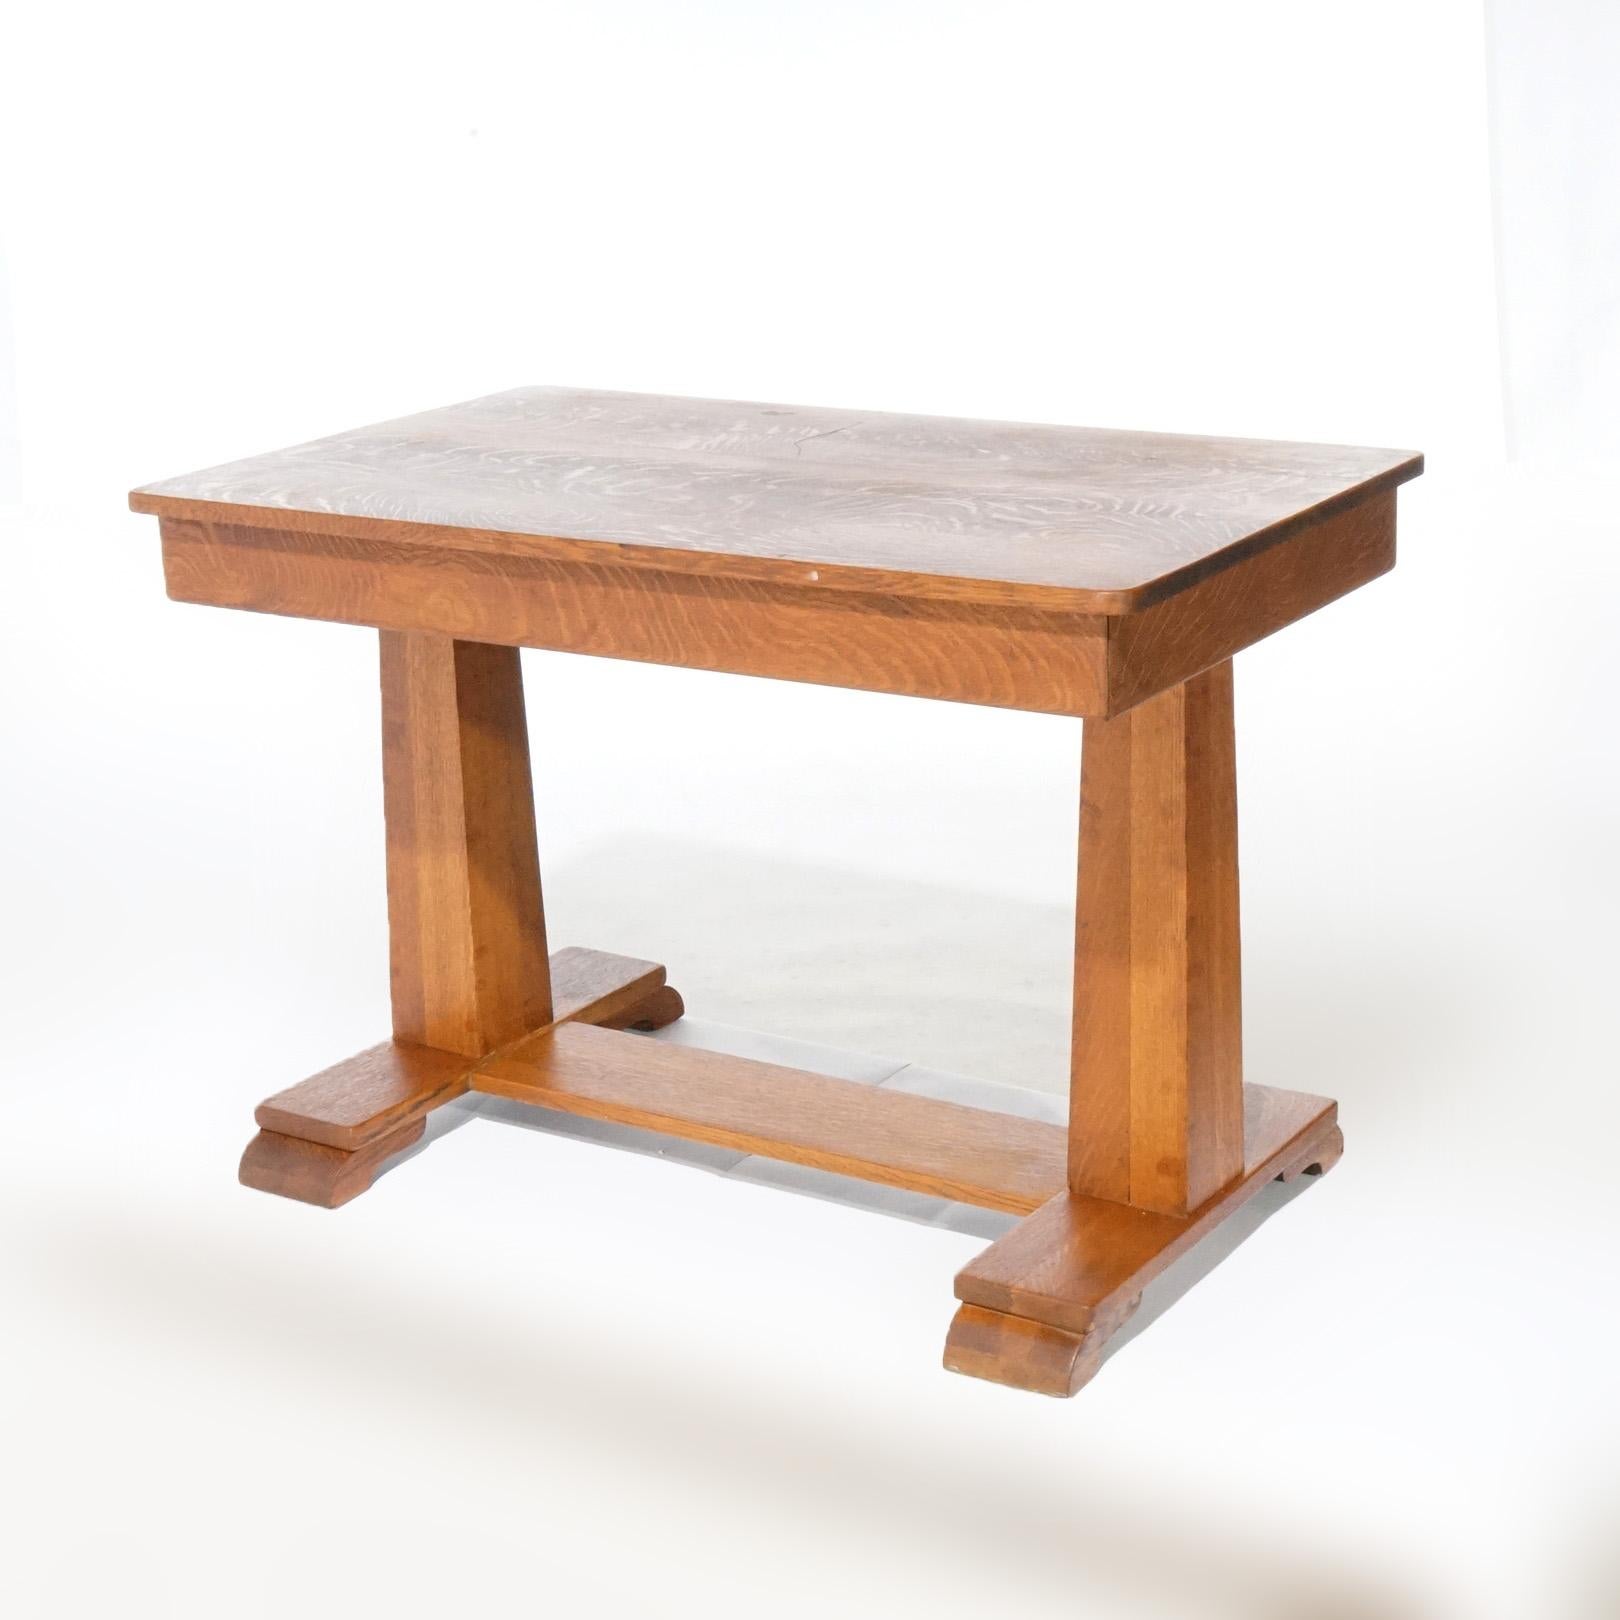 An antique Arts and Crafts Mission library table offers quarter sawn oak construction in trestle style with upper having single long drawer, raised on square tapered legs with lower shelf and stylized scroll feet, c1910

Measures - 28.5